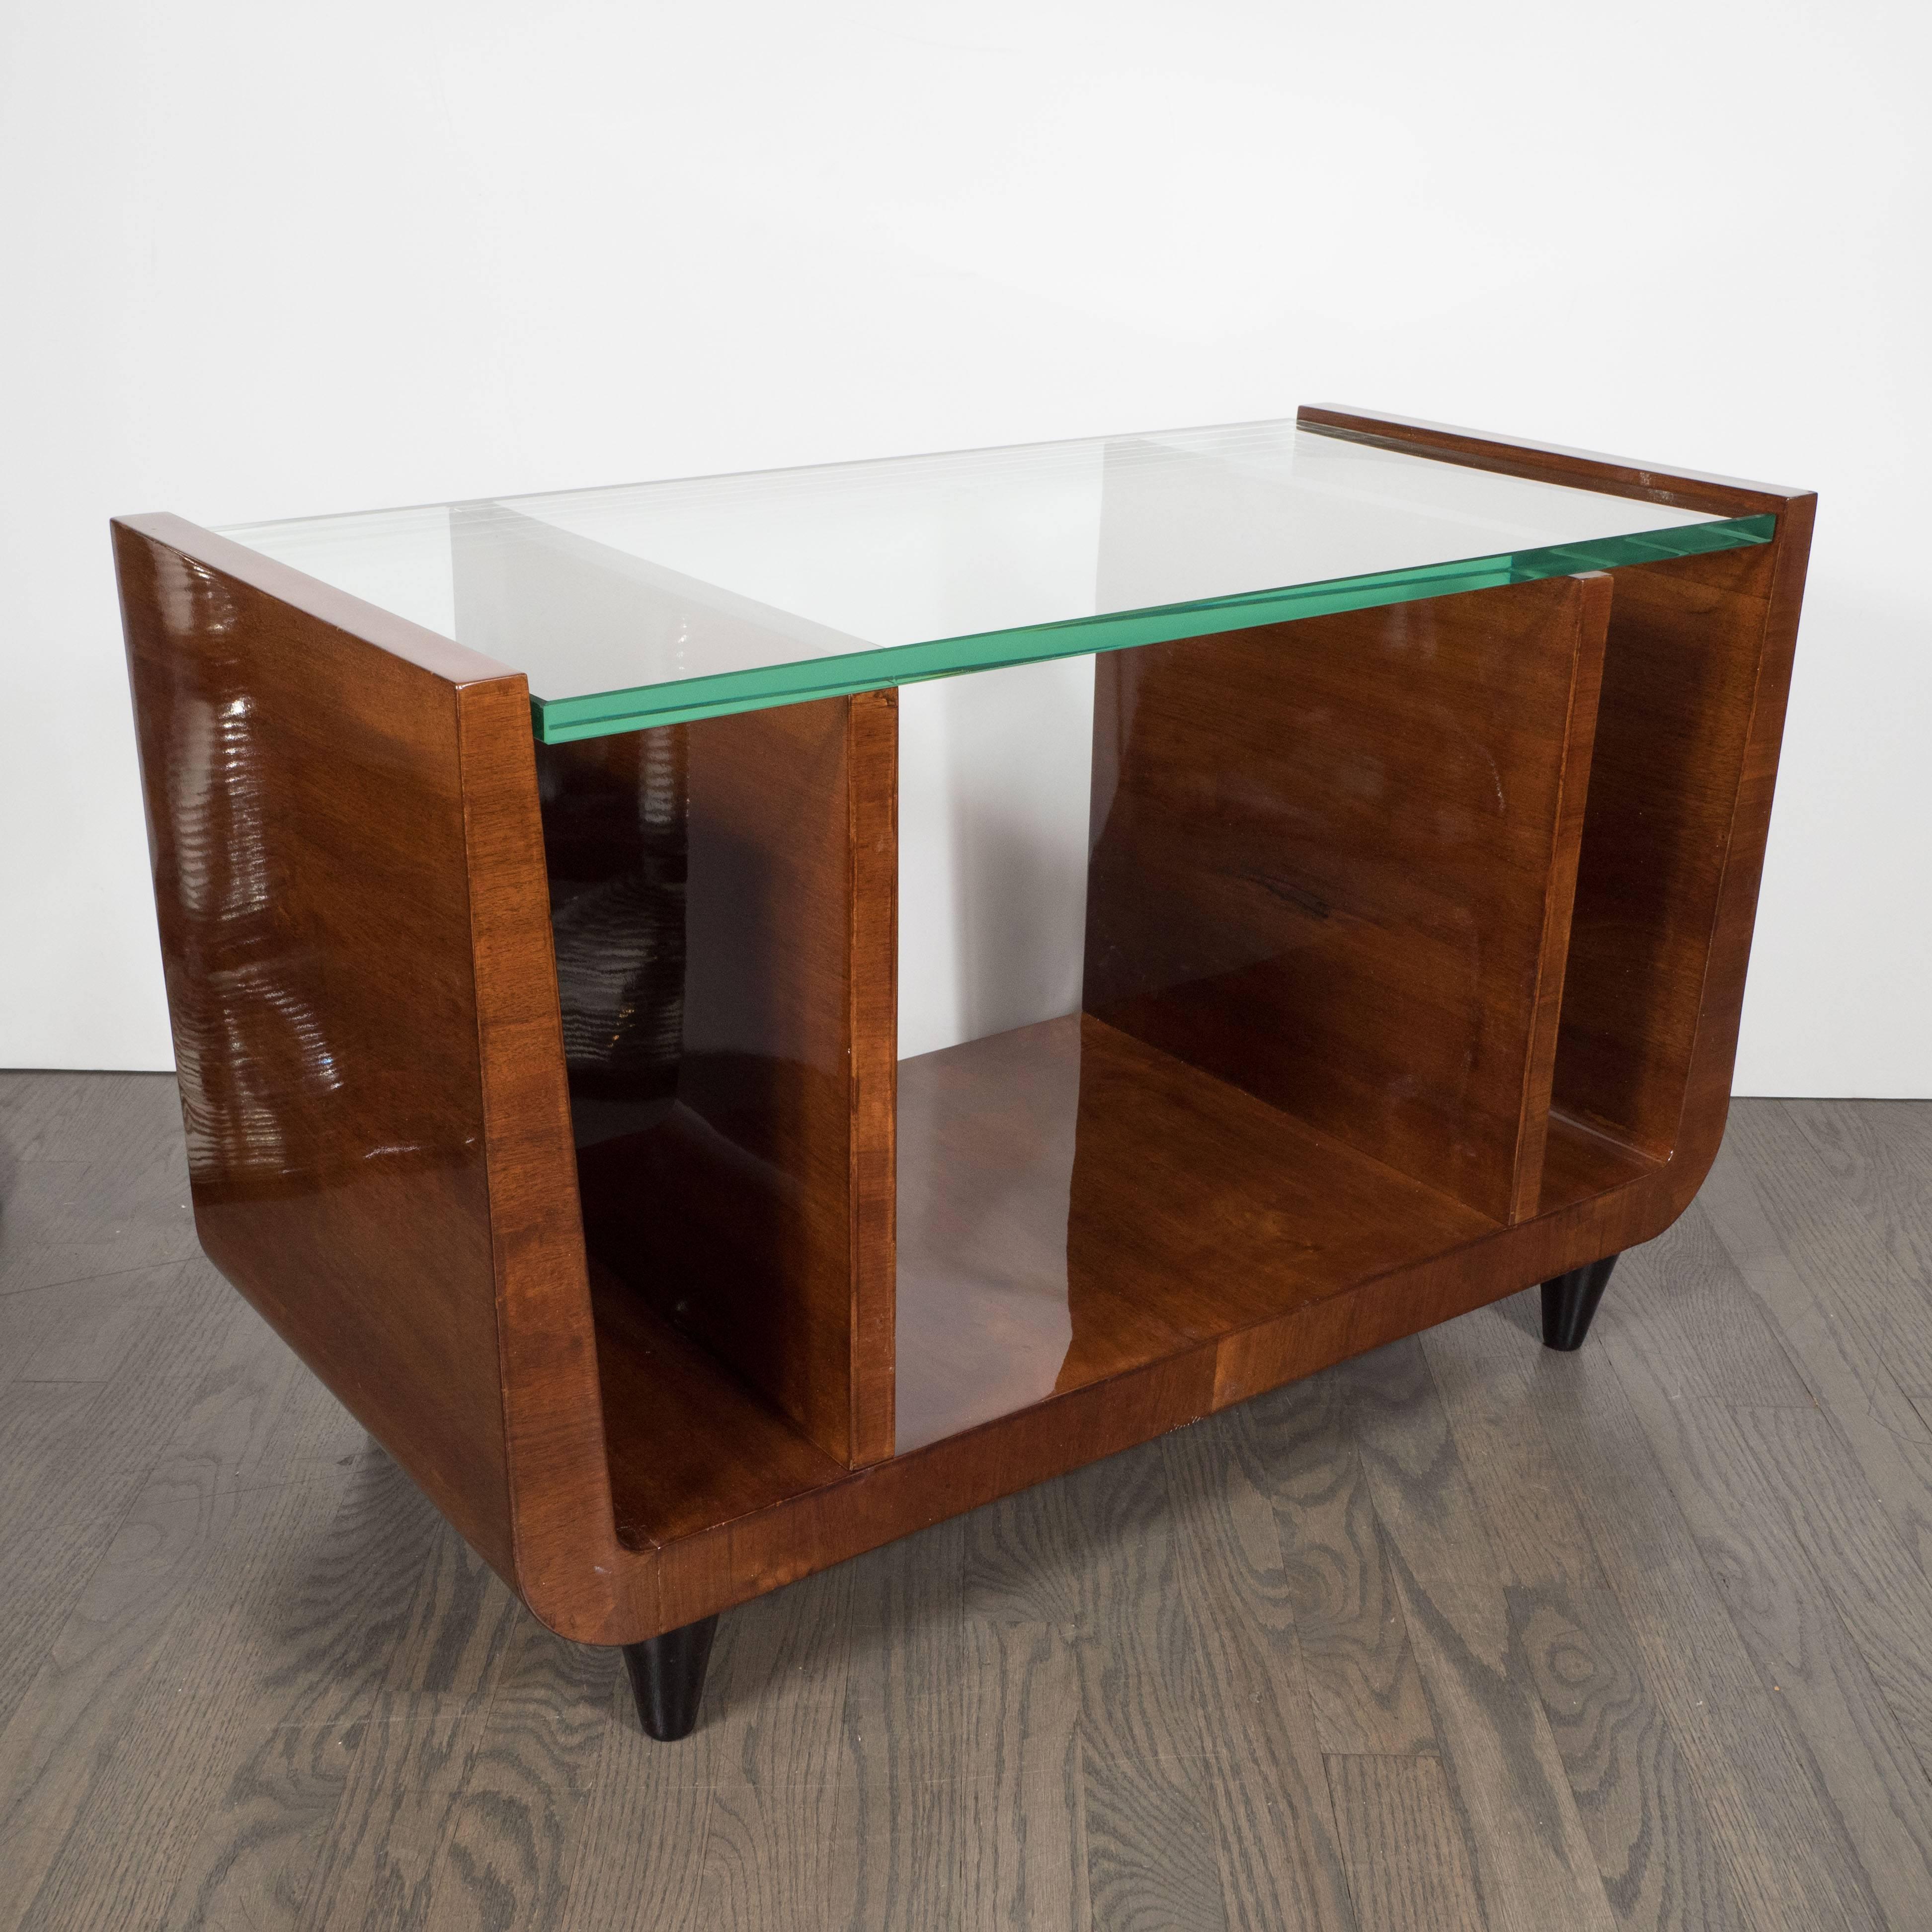 This elegant streamline bookmatched walnut, black lacquer and glass cocktail/ occasional table was realized in France, circa 1935. With its timelessly elegant design- featuring four vertical planes extended from the base and simple black lacquer